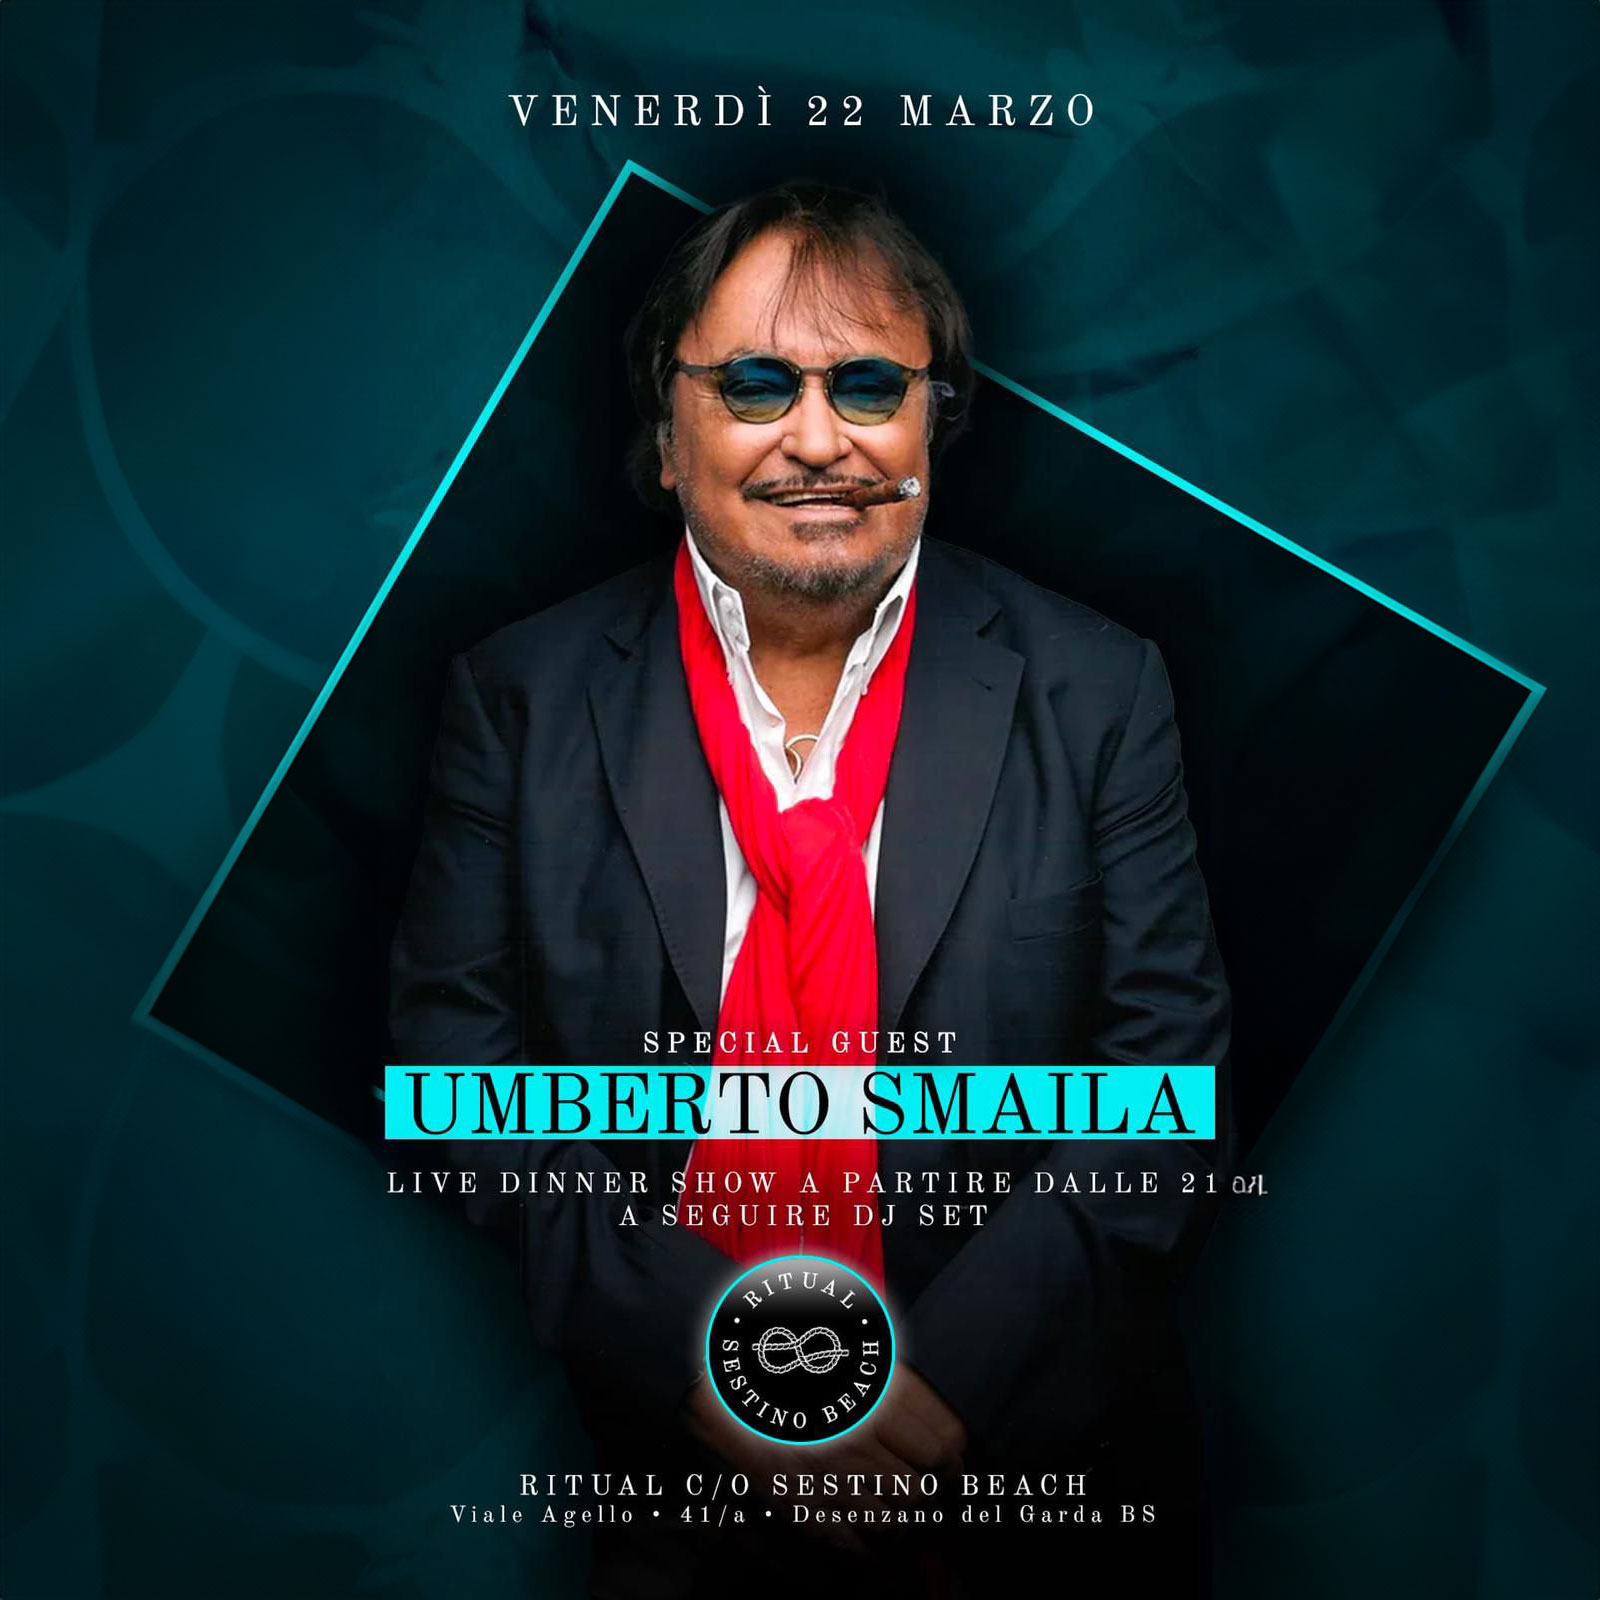 VEN-22-MARZO-SESTINO Live Dinner Show. Special guest Umberto Smaila